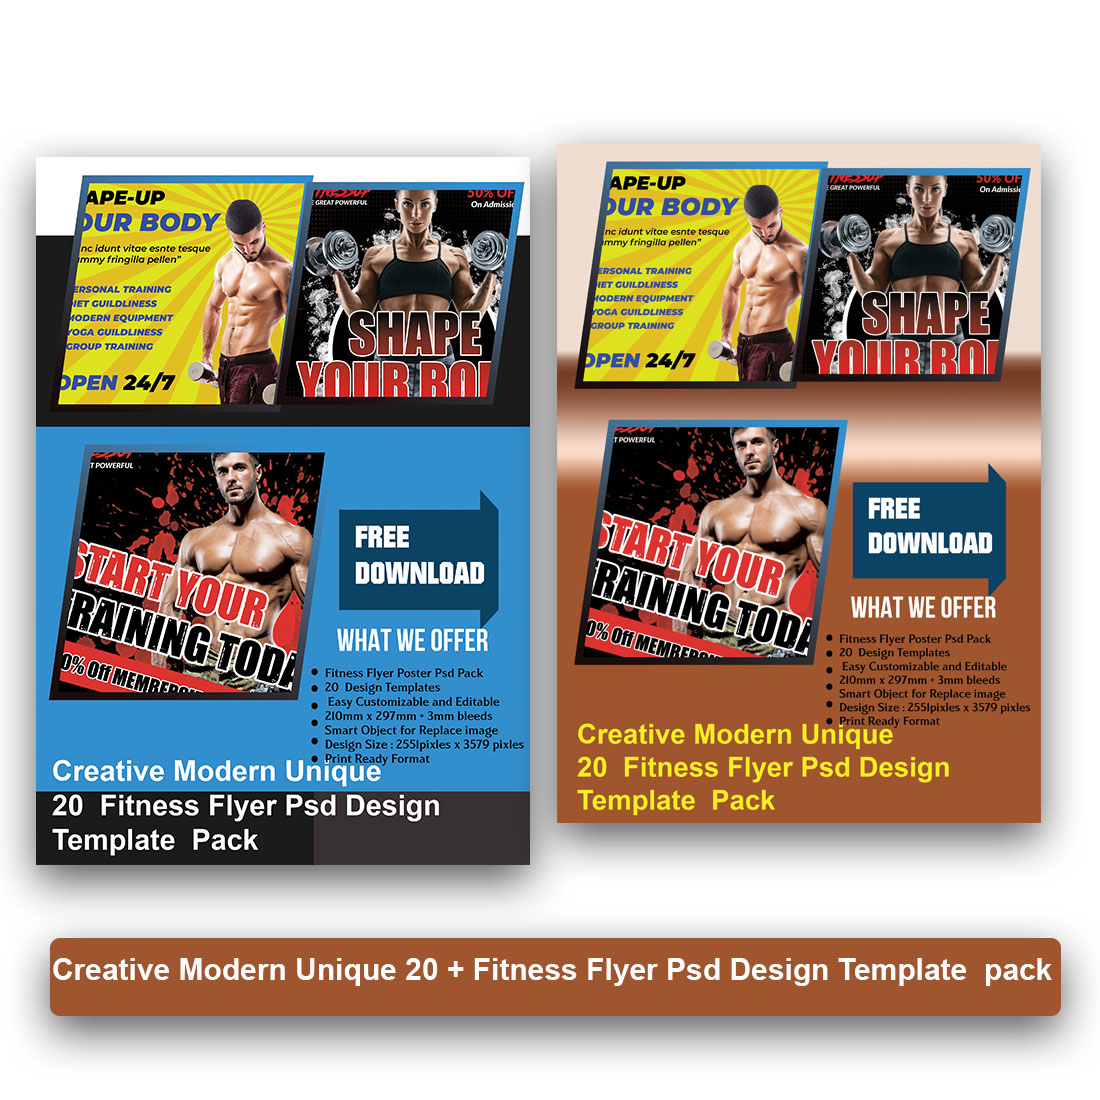 Creative Modern Unique 20 + Fitness Flyer PSD Design Template pack preview image.